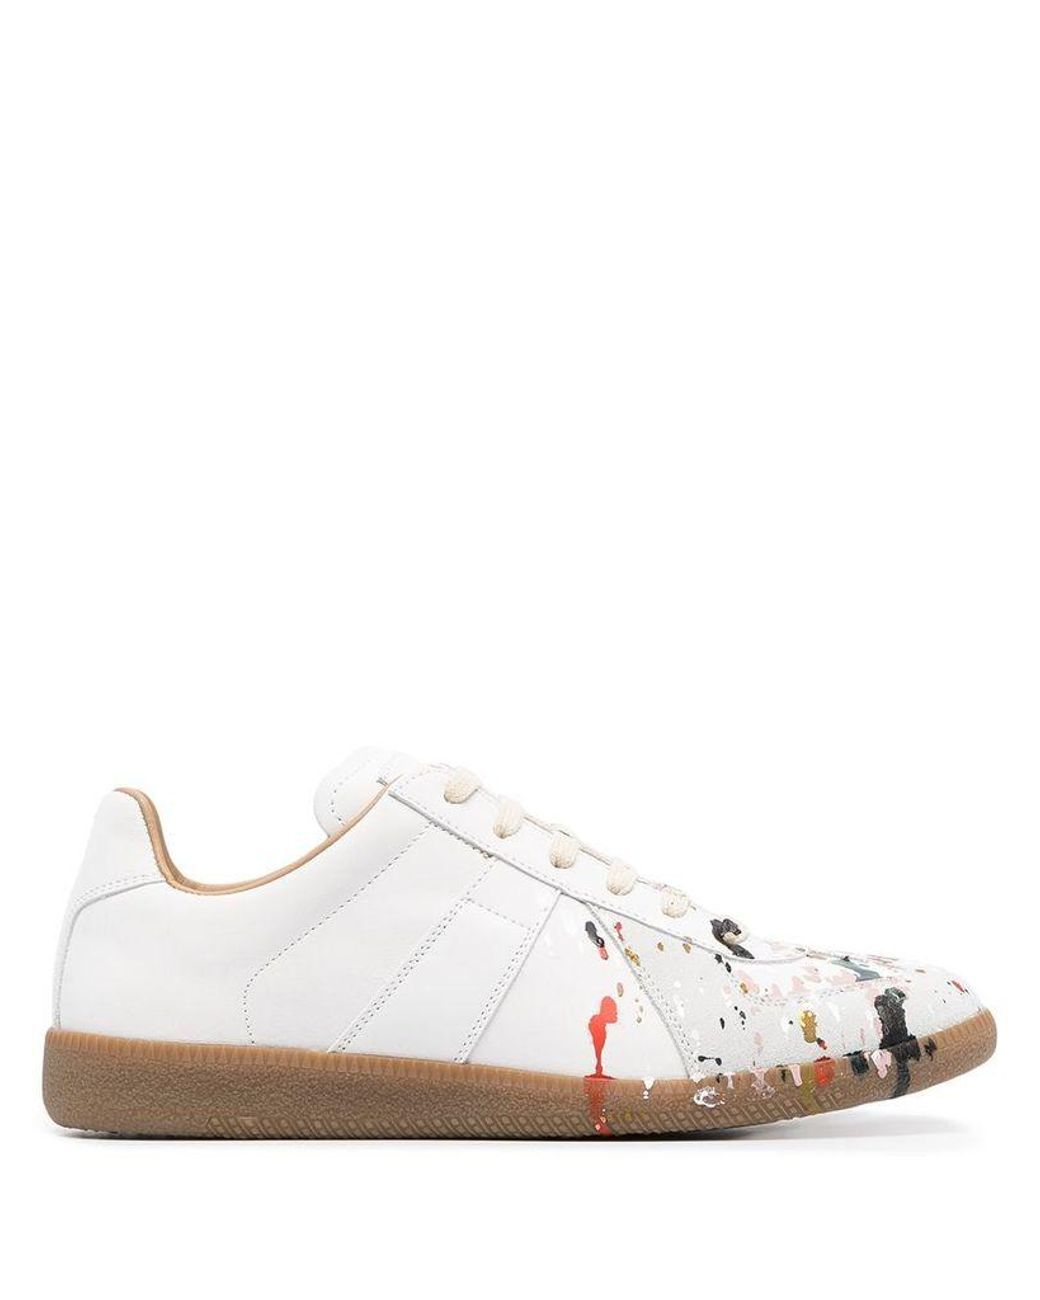 Maison Margiela Women's S58ws0101p1892h8613 White Leather Sneakers - Lyst